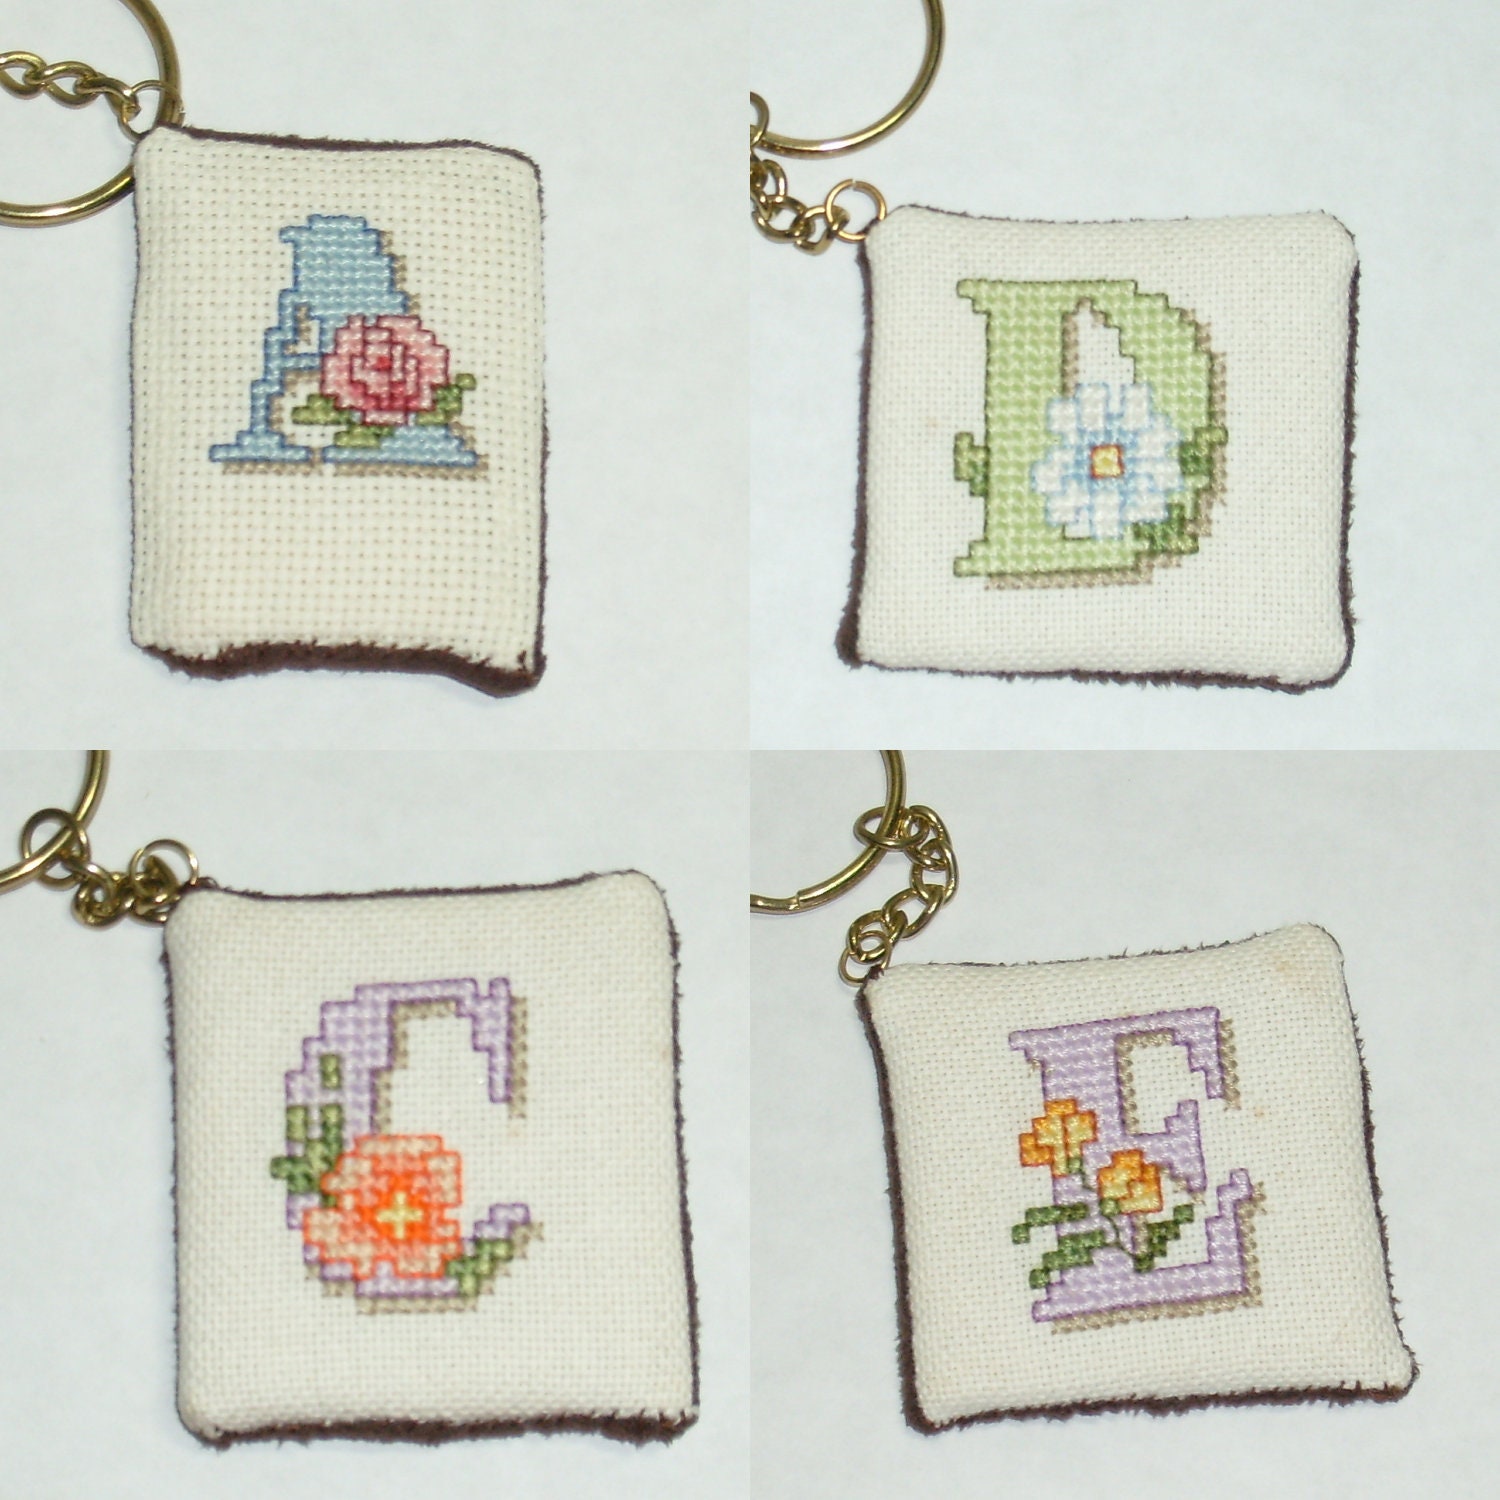 irenesmemorystitches Initial Cross Stitch Key Chains